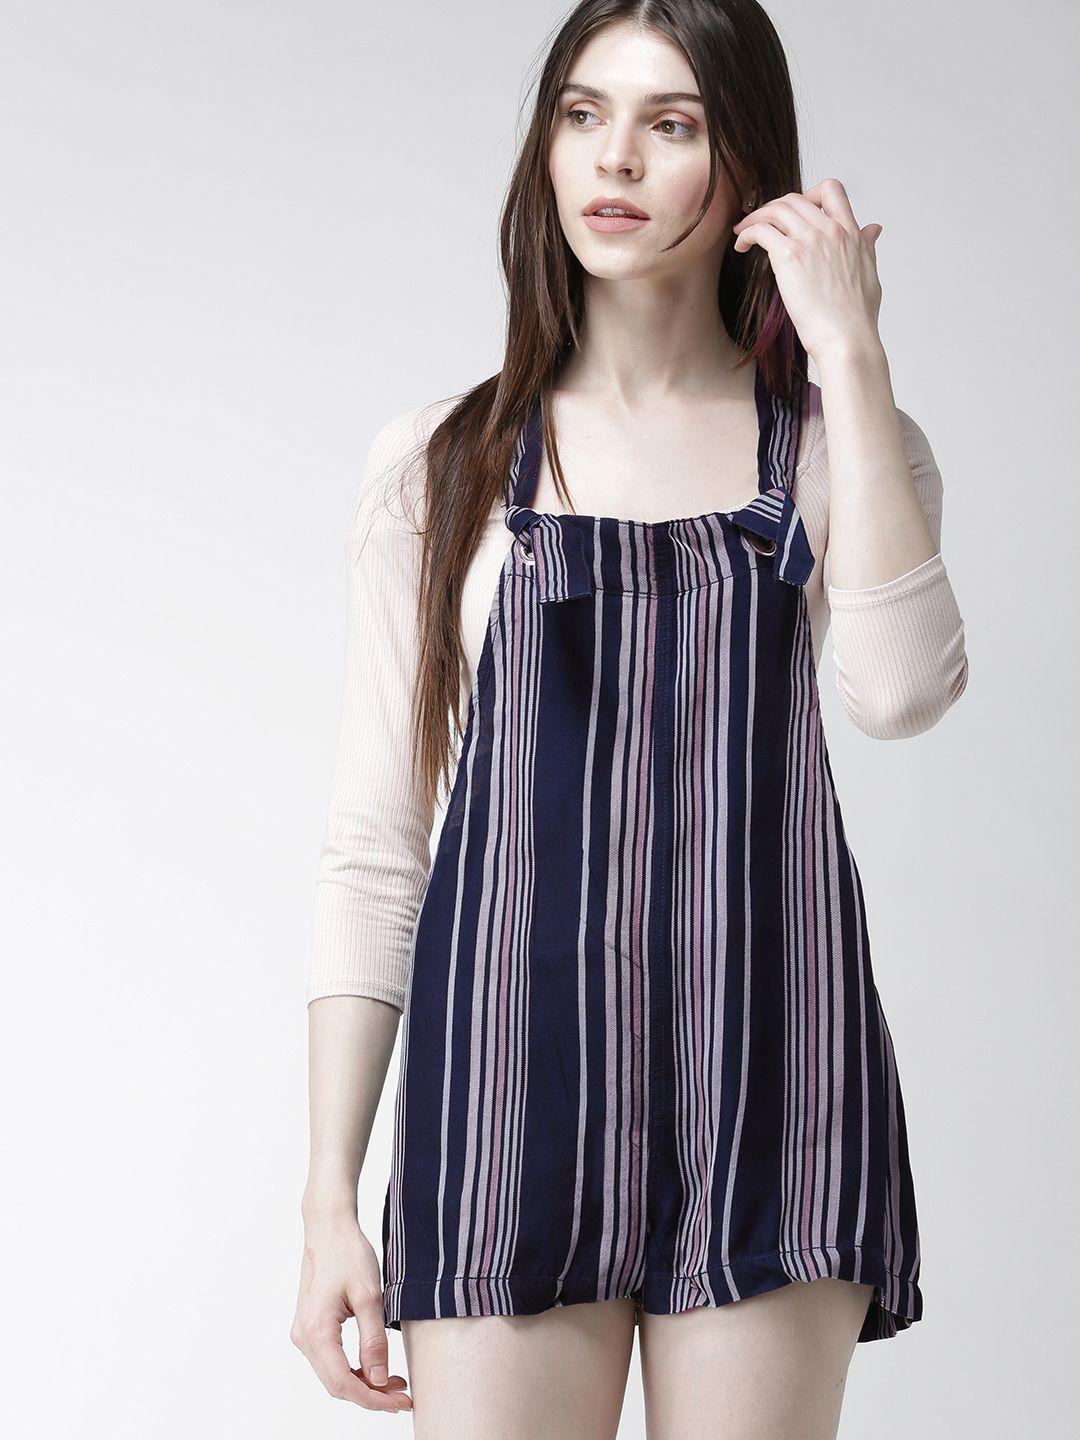 forever-21-women-navy-blue-striped-playsuit